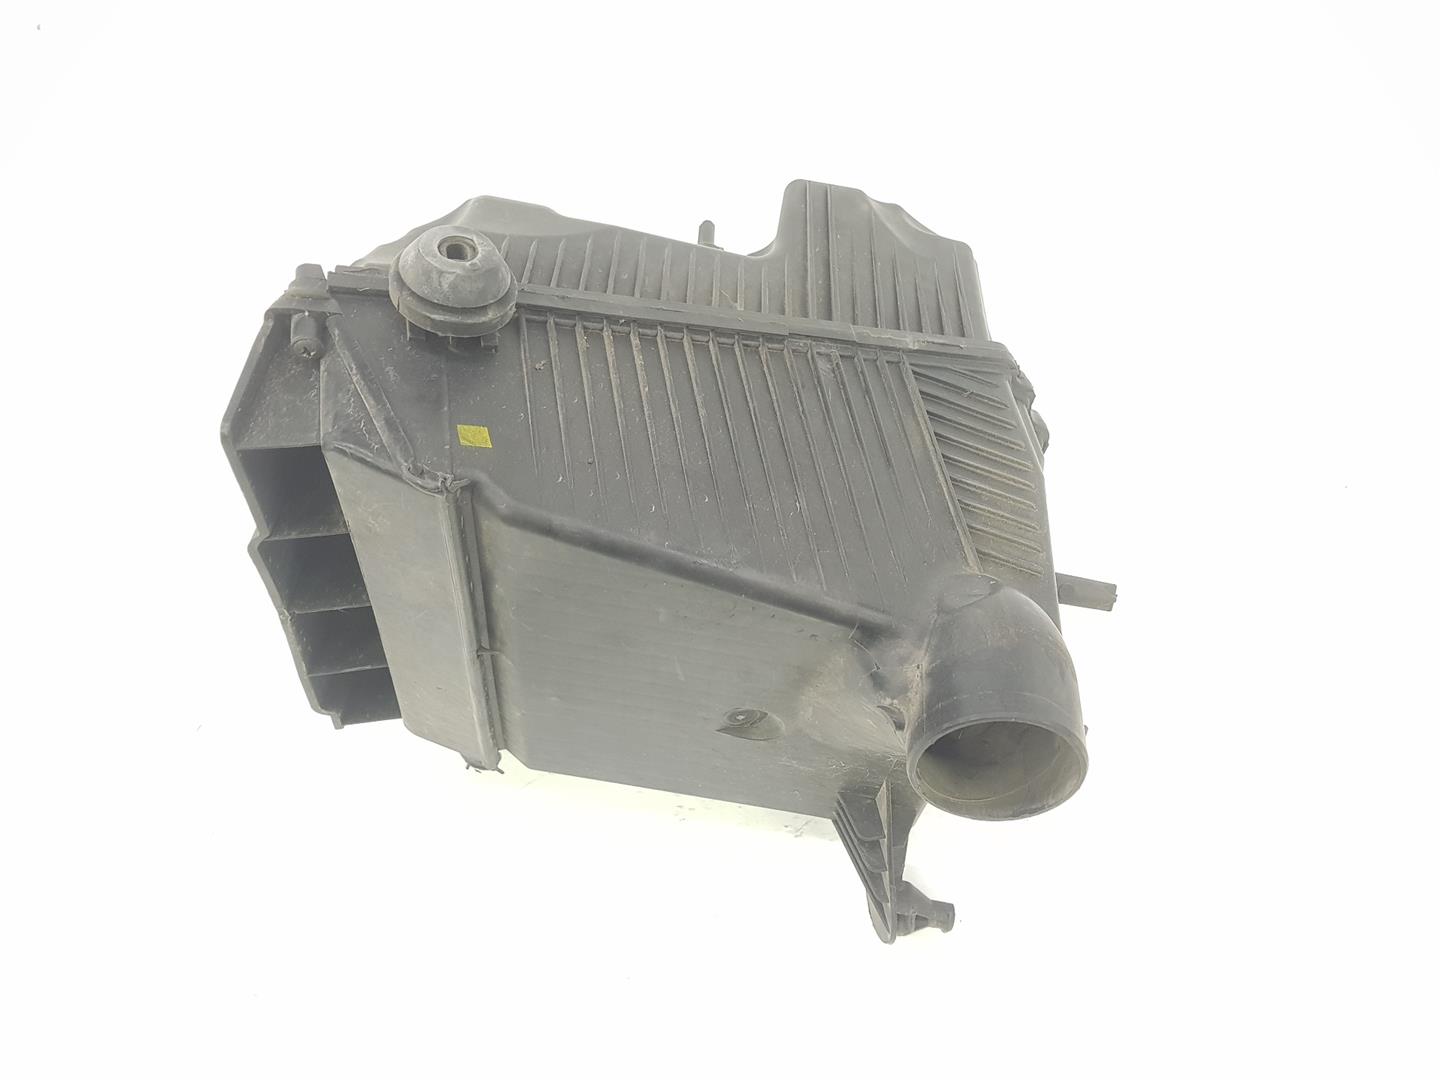 RENAULT Kangoo 2 generation (2007-2021) Other Engine Compartment Parts 8200788196, 8200788196 19755945